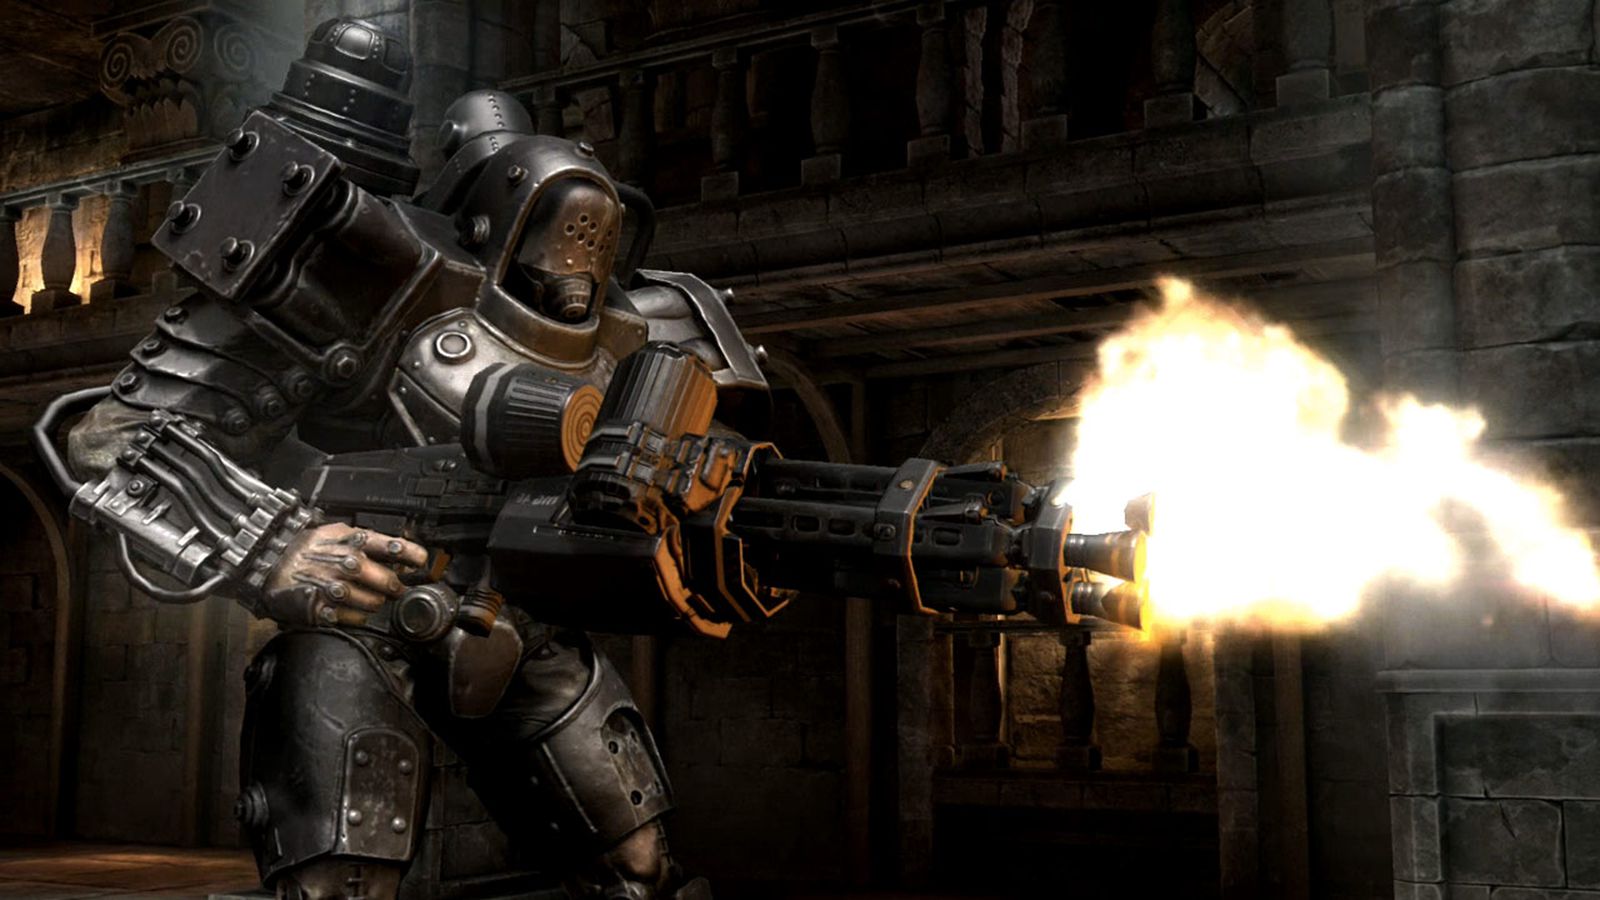 Wolfenstein: The Old Blood is a prequel to The New Order, coming this May